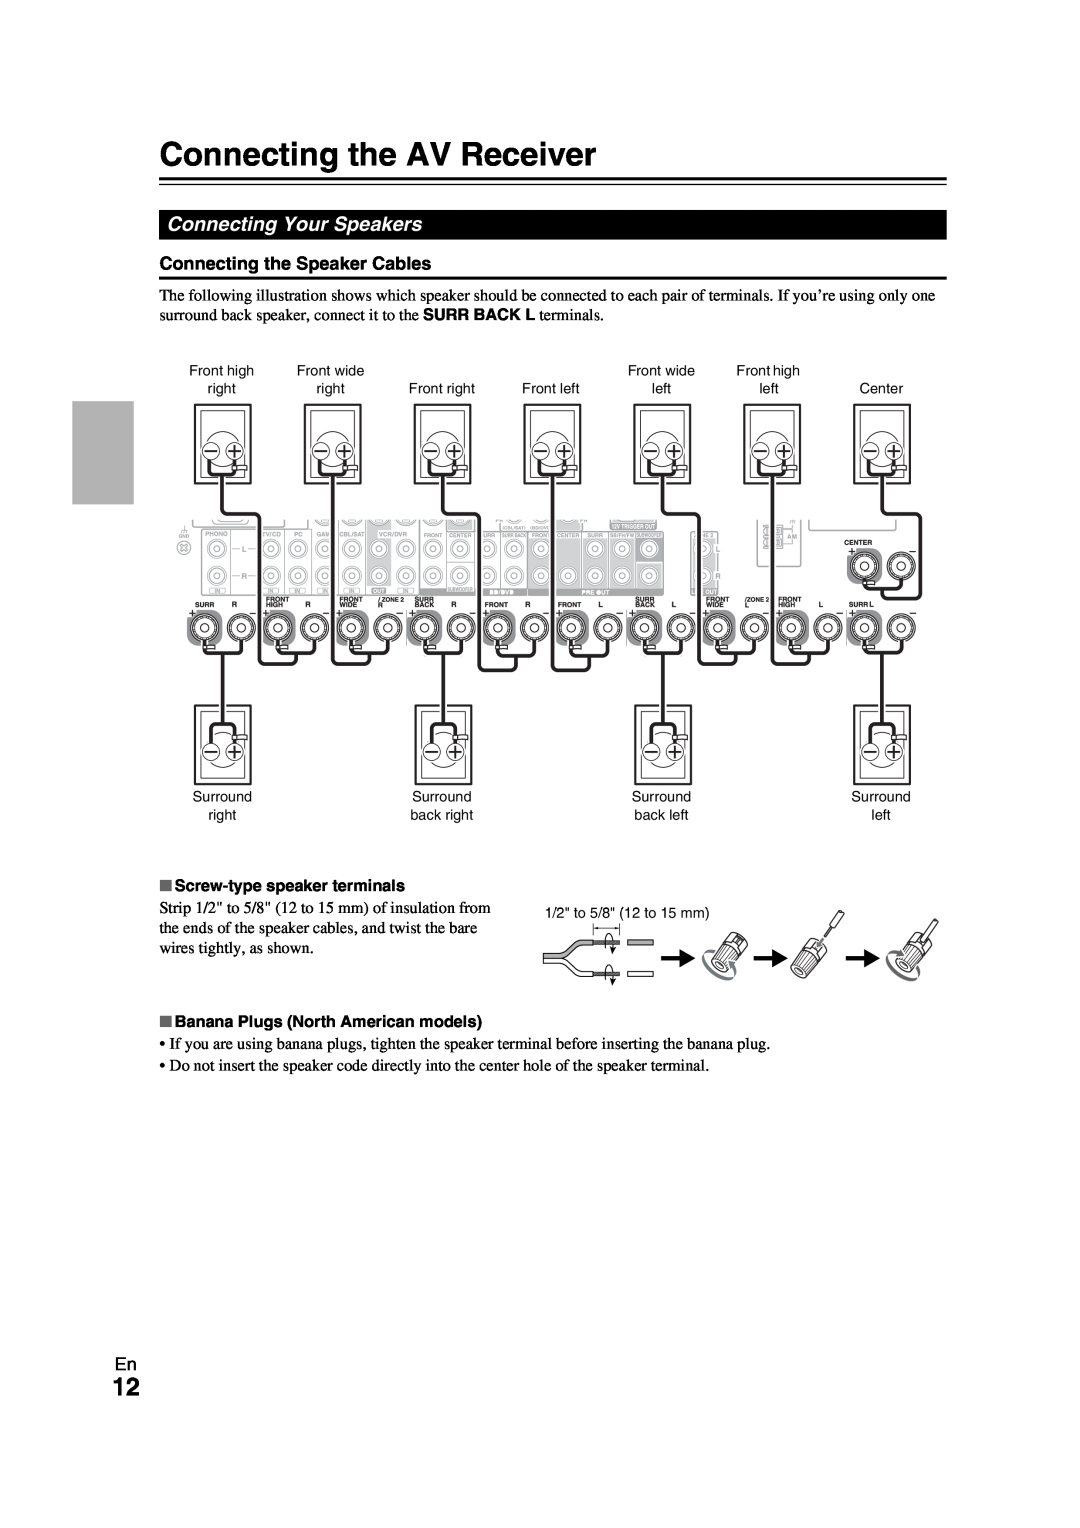 Onkyo TX-NR709 instruction manual Connecting the AV Receiver, Connecting Your Speakers, Screw-typespeaker terminals 